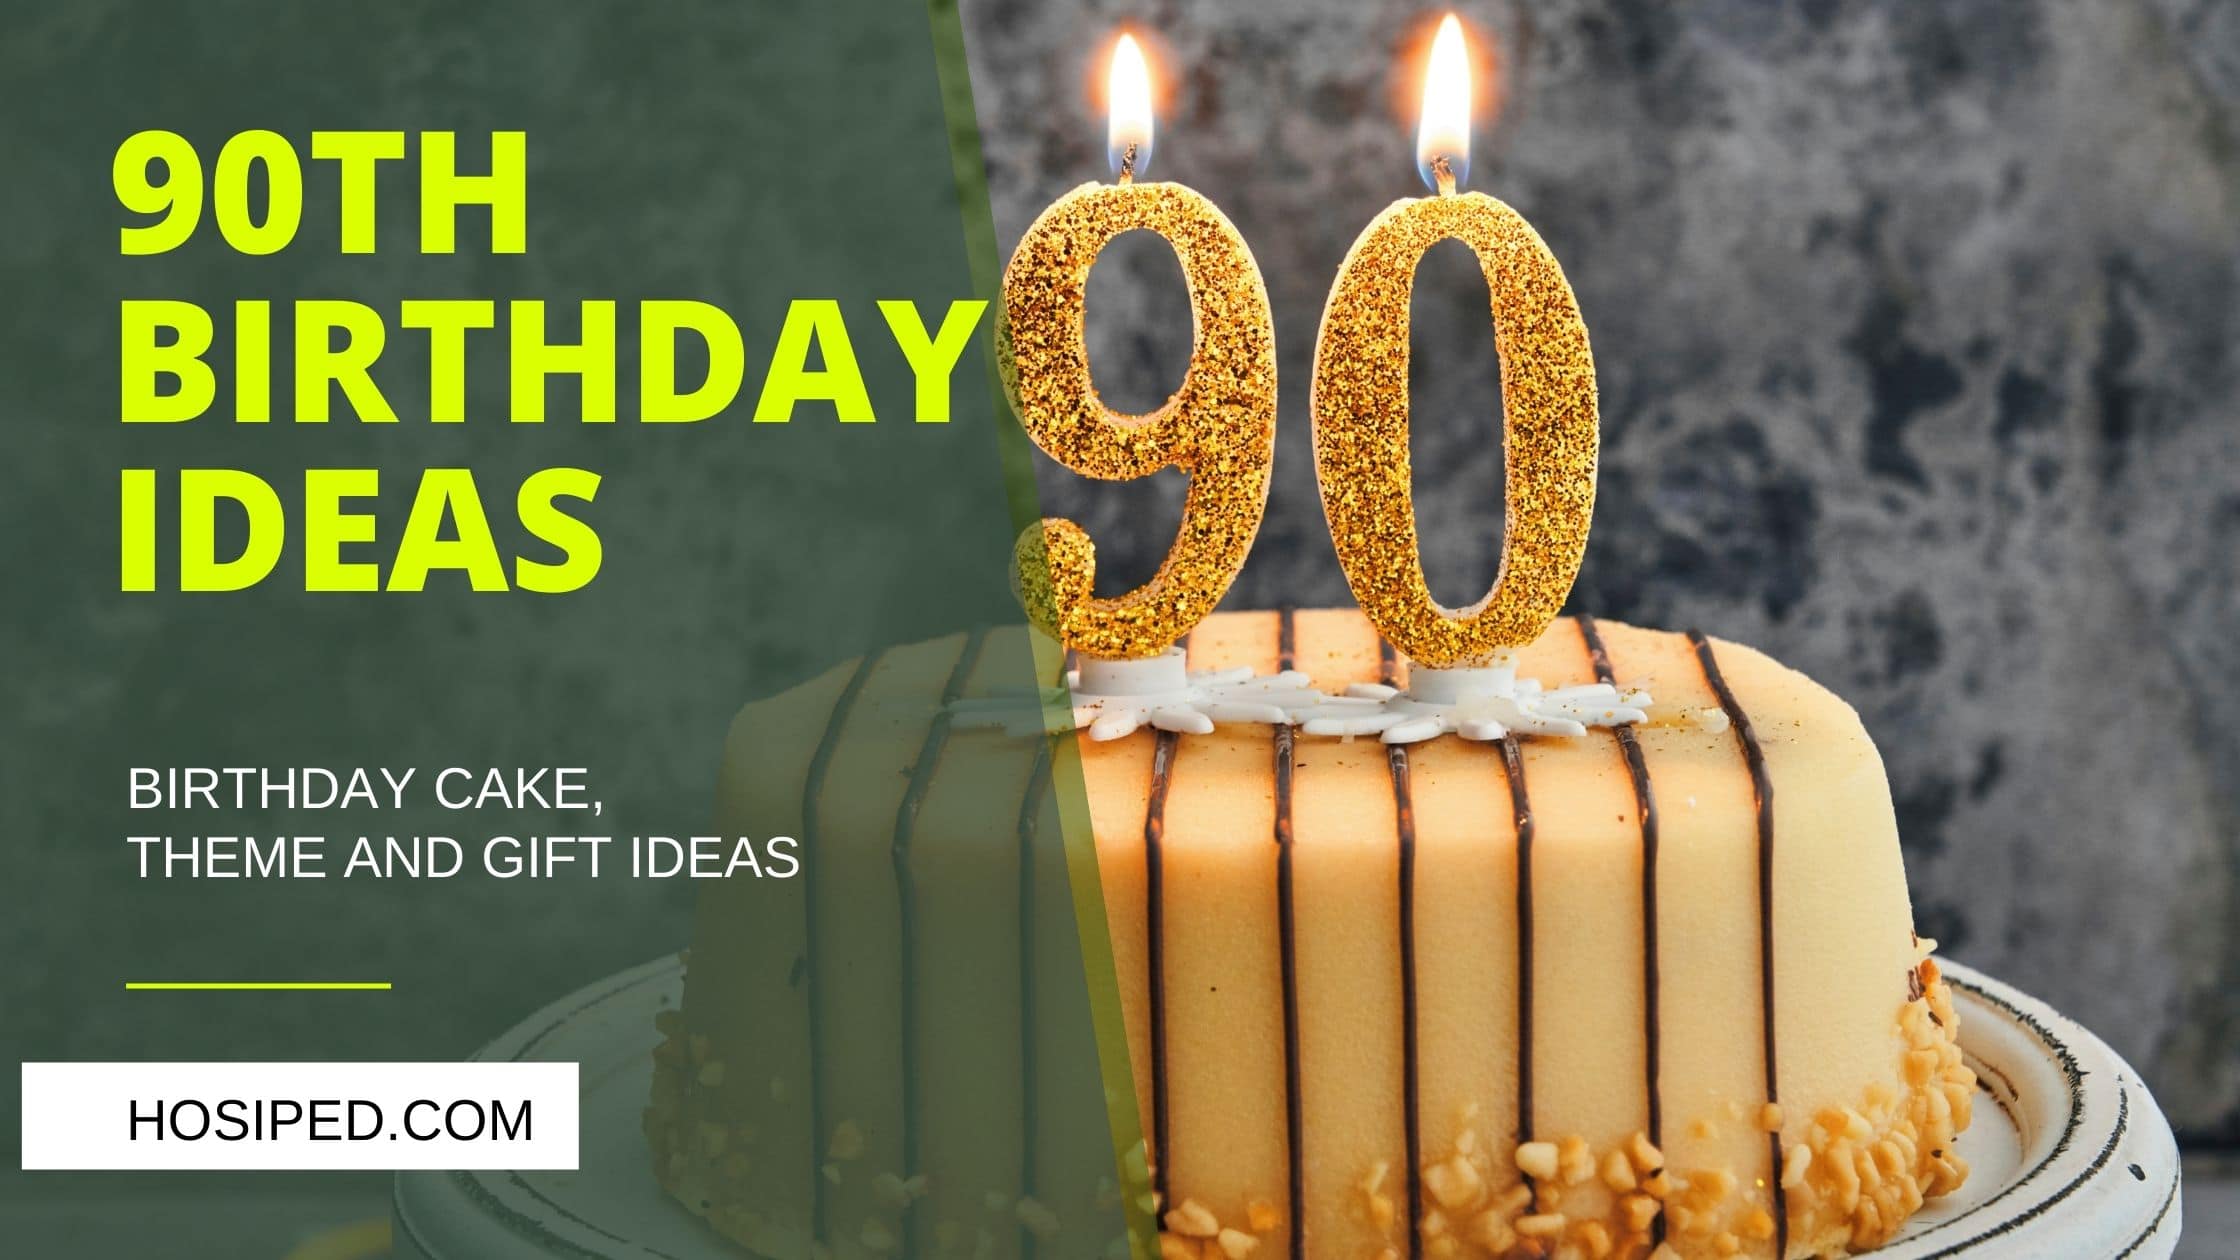 90th birthday gifts, cakes and theme ideas